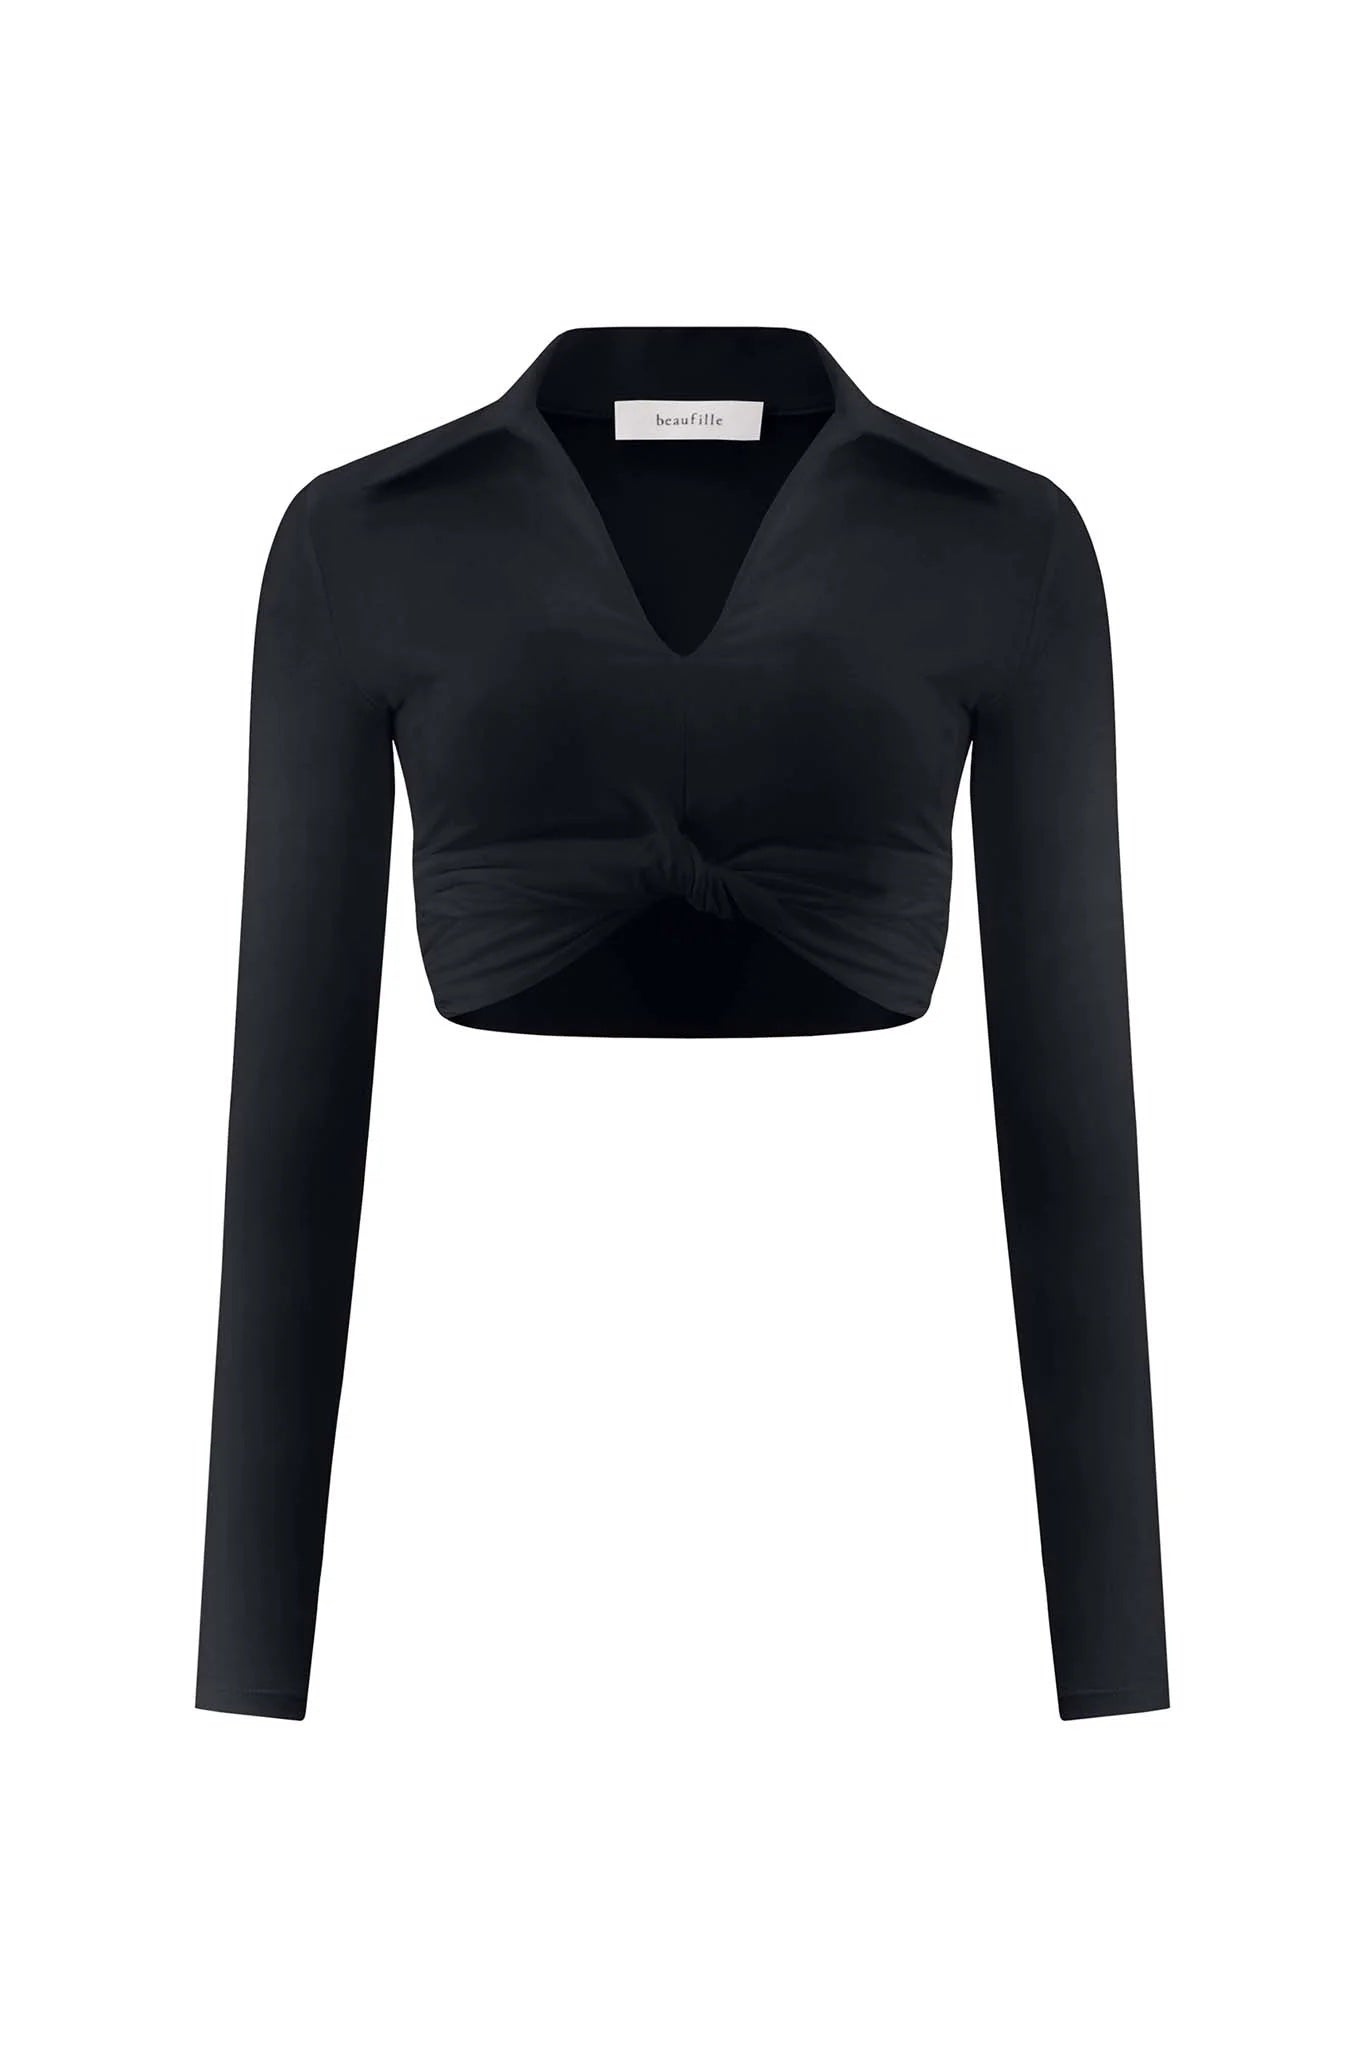 BEAUFILLE Coma Blouse in Black